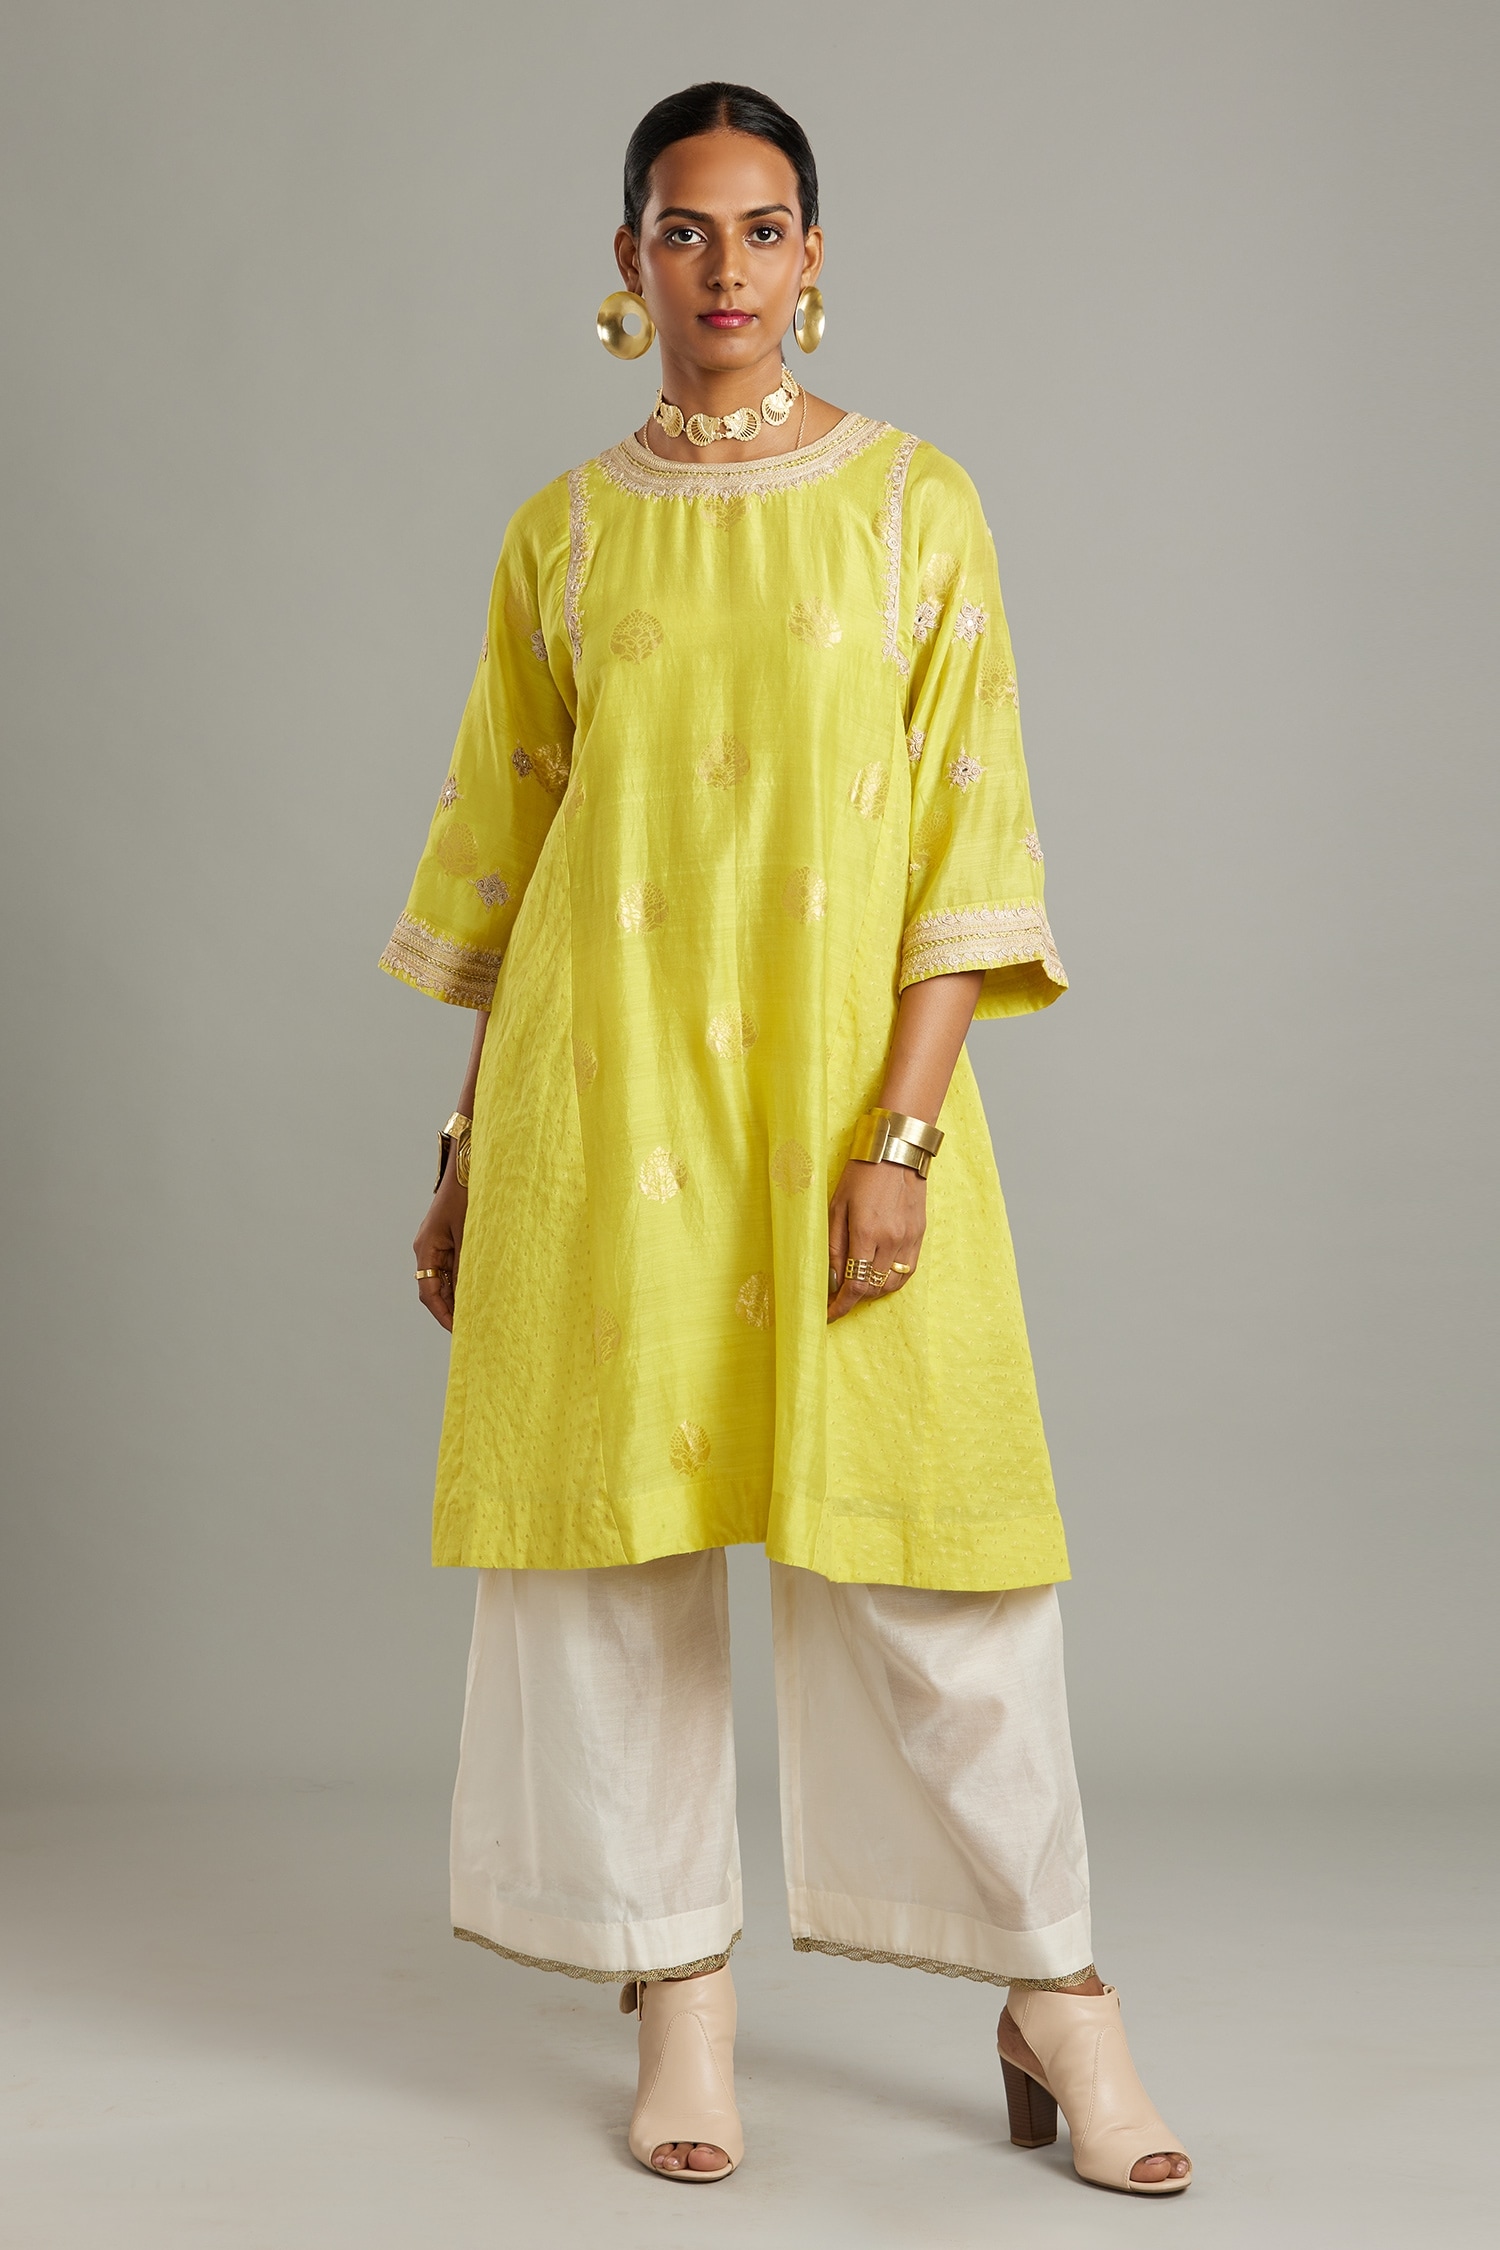 Buy Yellow Hand Block Printed Cotton Kurta with White Pants and Mul Dupatta  - Set of 3 | JS374/S/JS7 | The loom